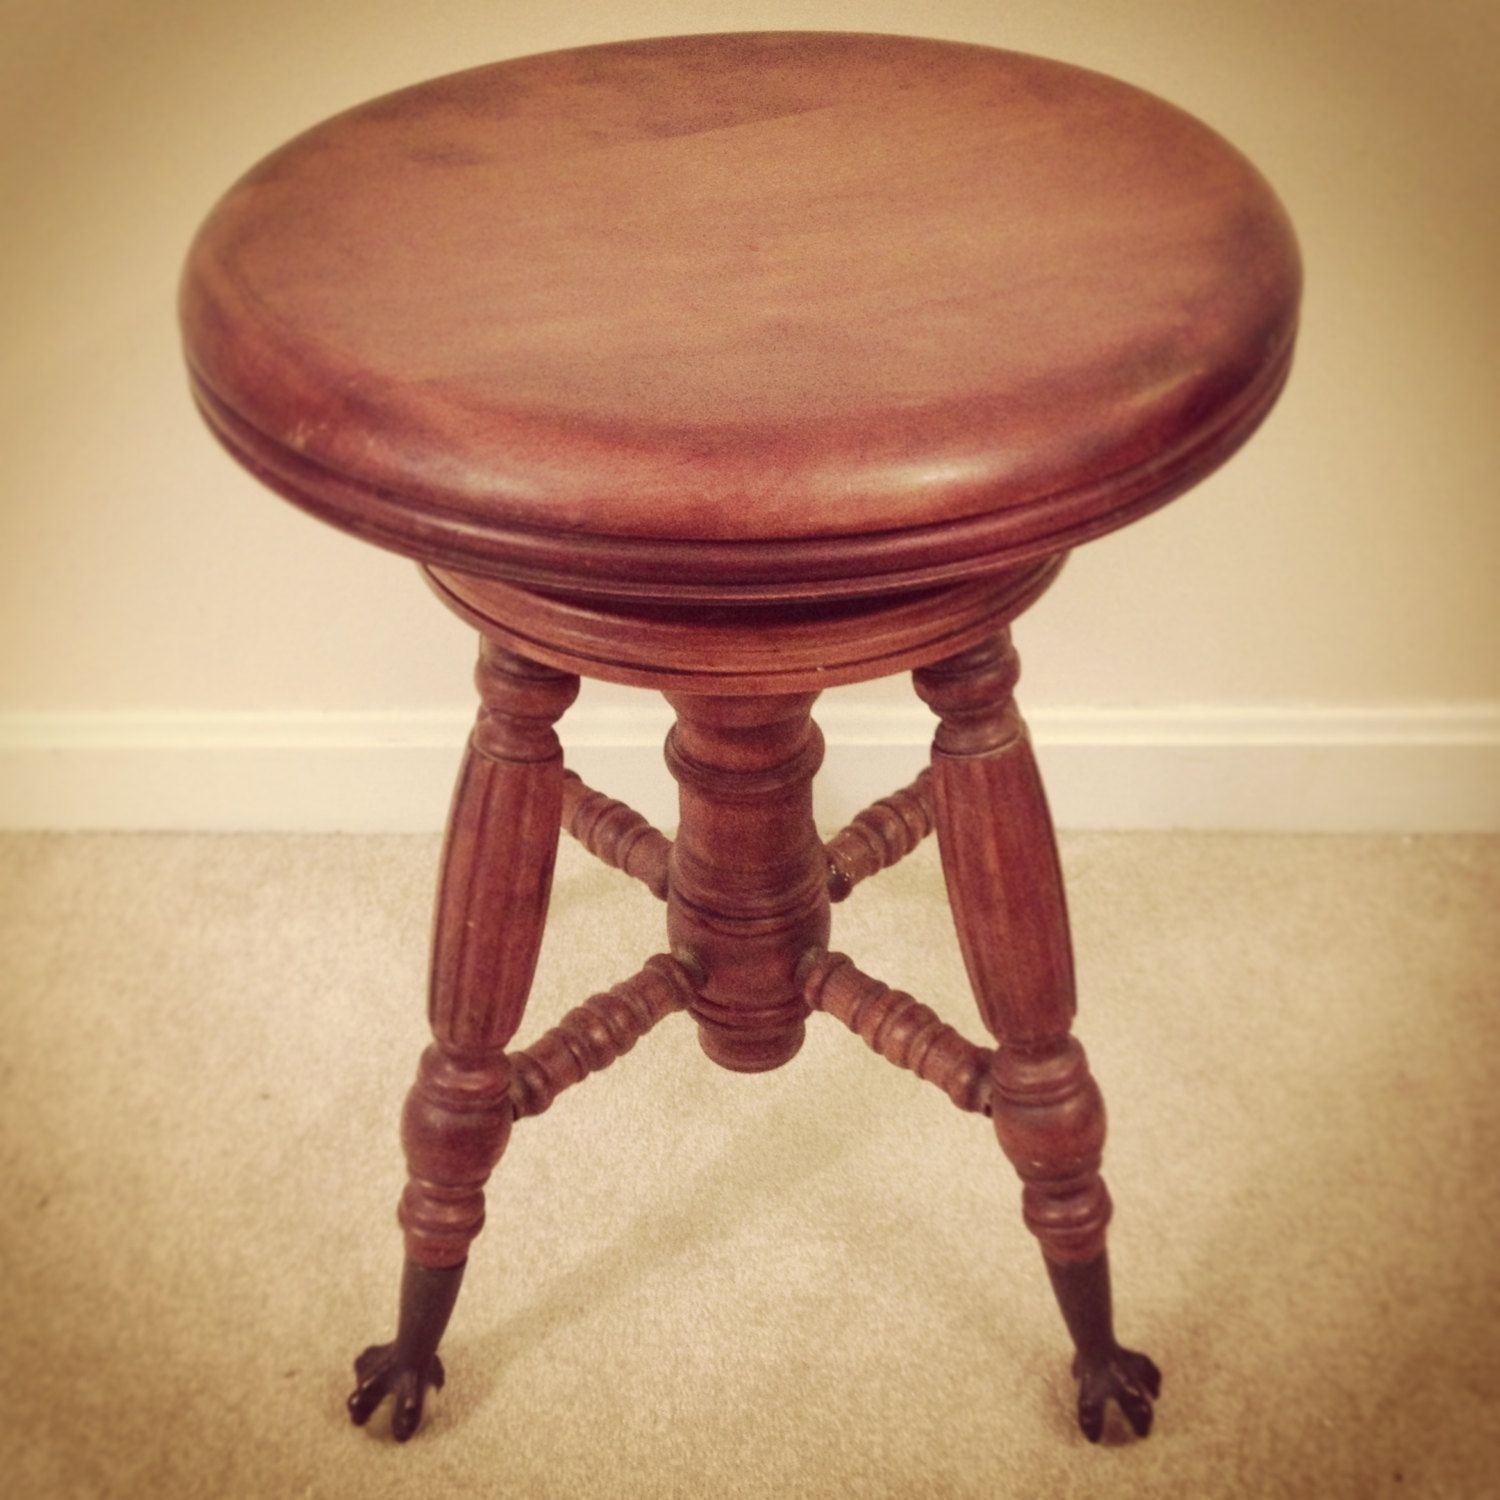 Victorian era antique piano stool with ball and claw feet